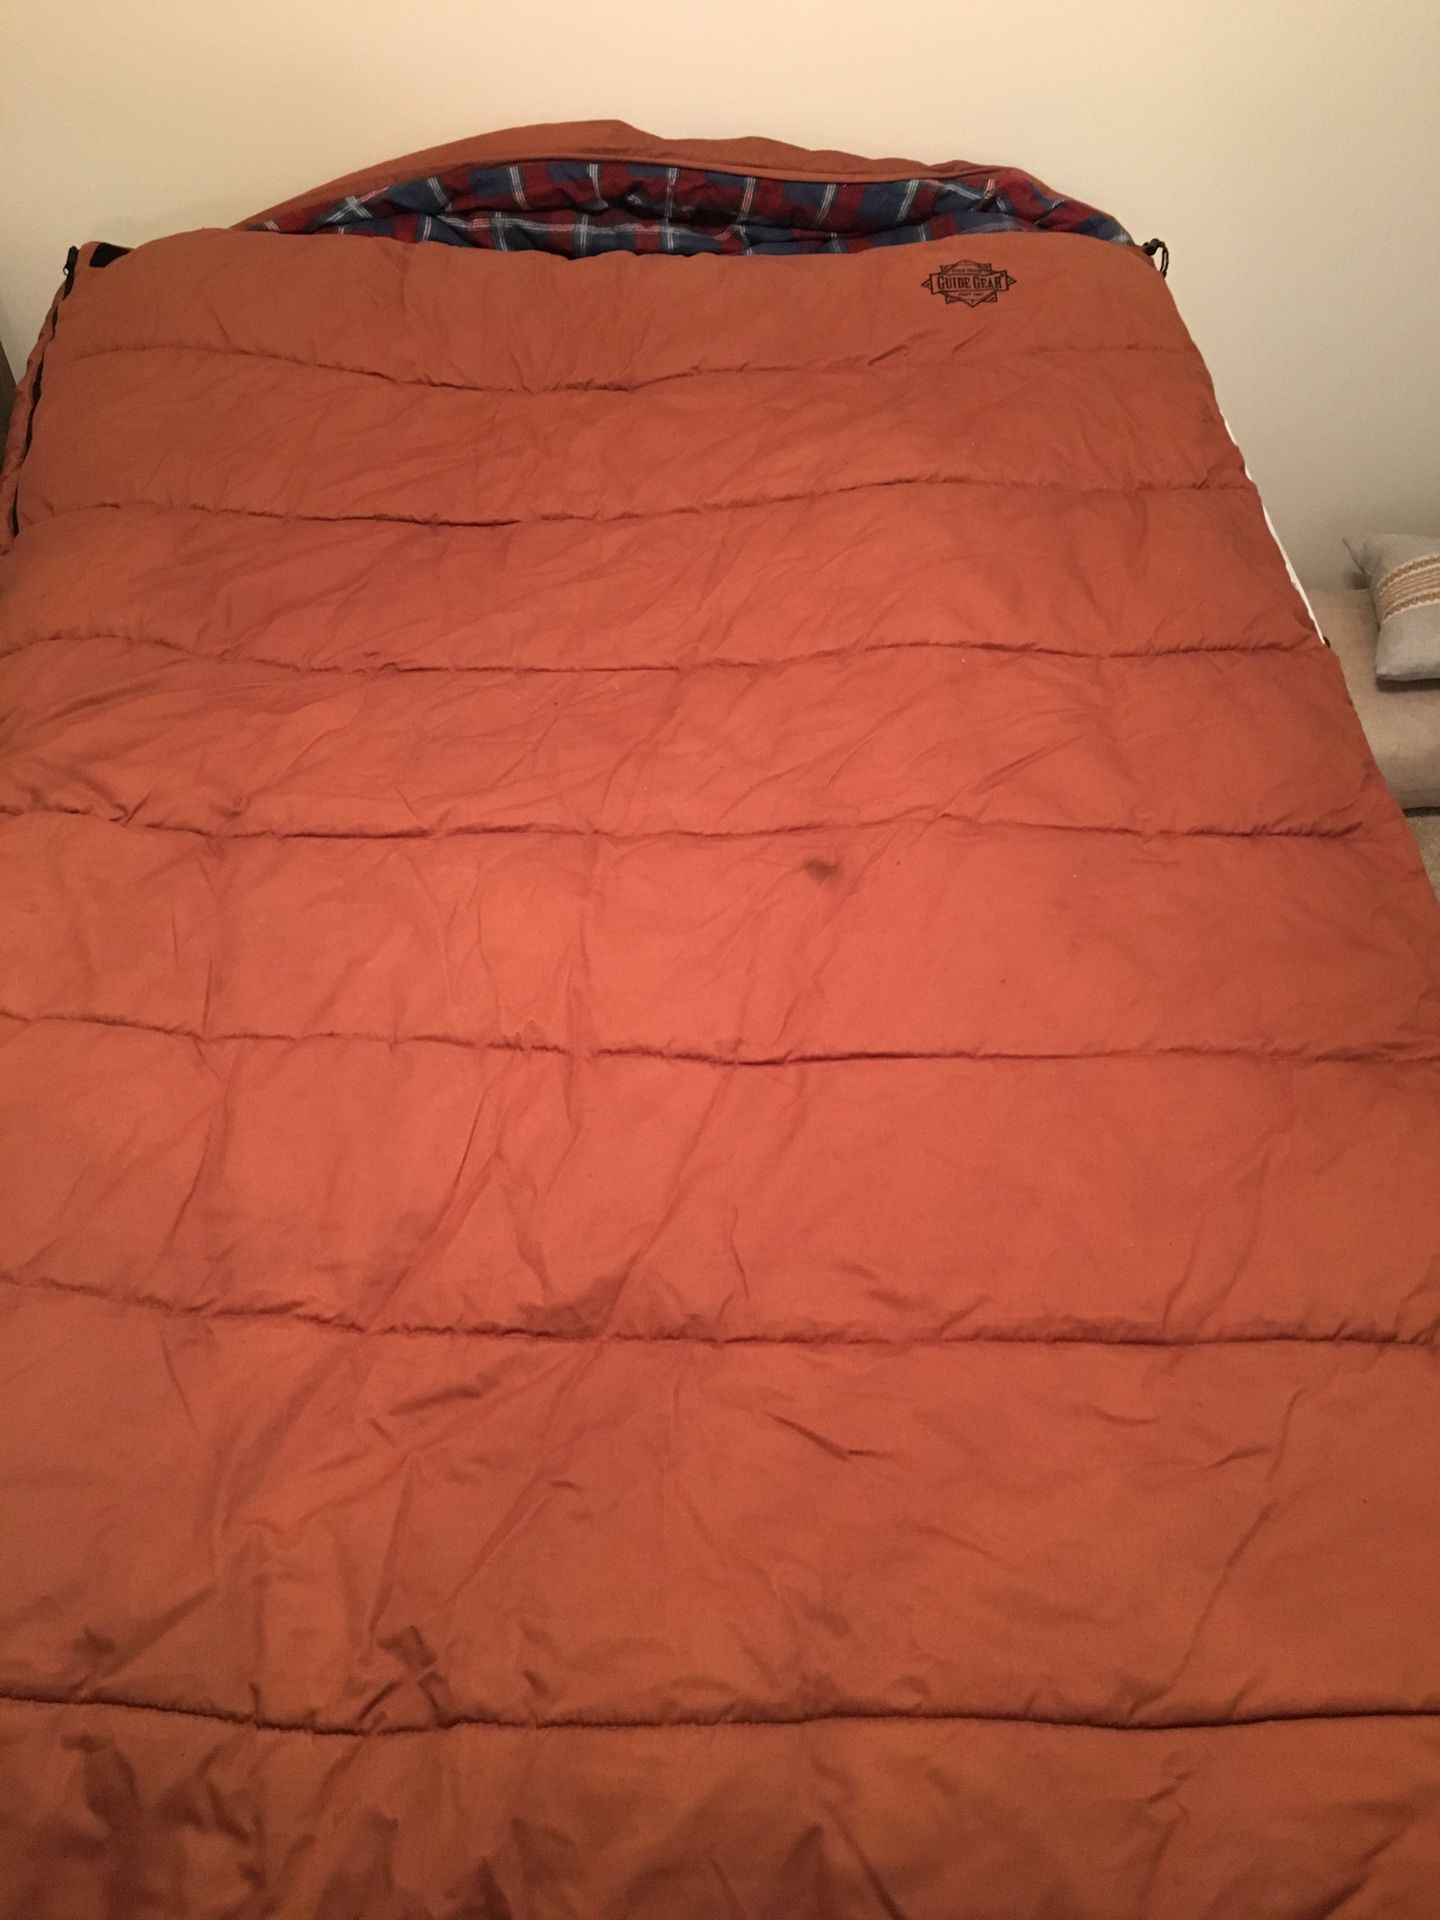 Guide Gear Queen Size Sleeping Bag For 2. -15 degrees F